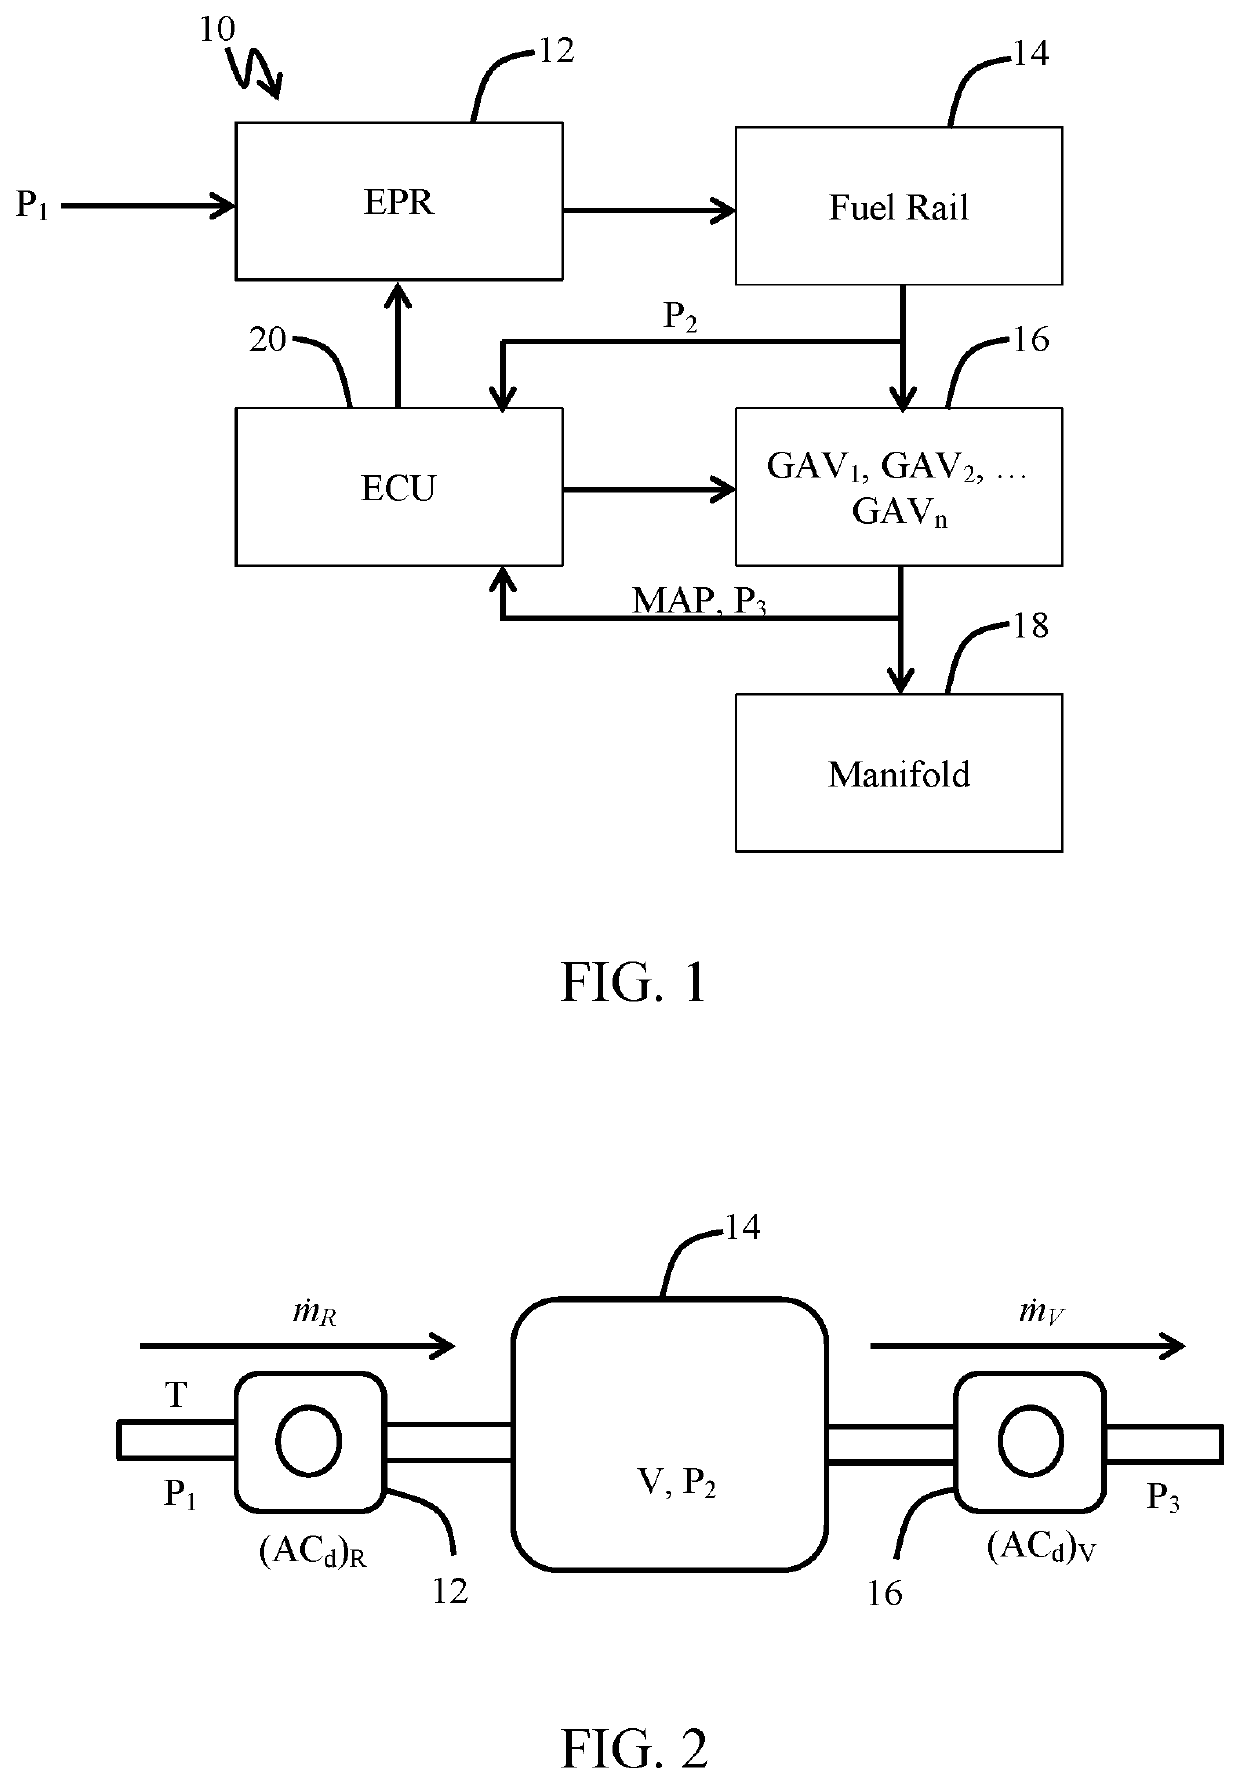 Pressure regulating mass flow system for multipoint gaseous fuel injection